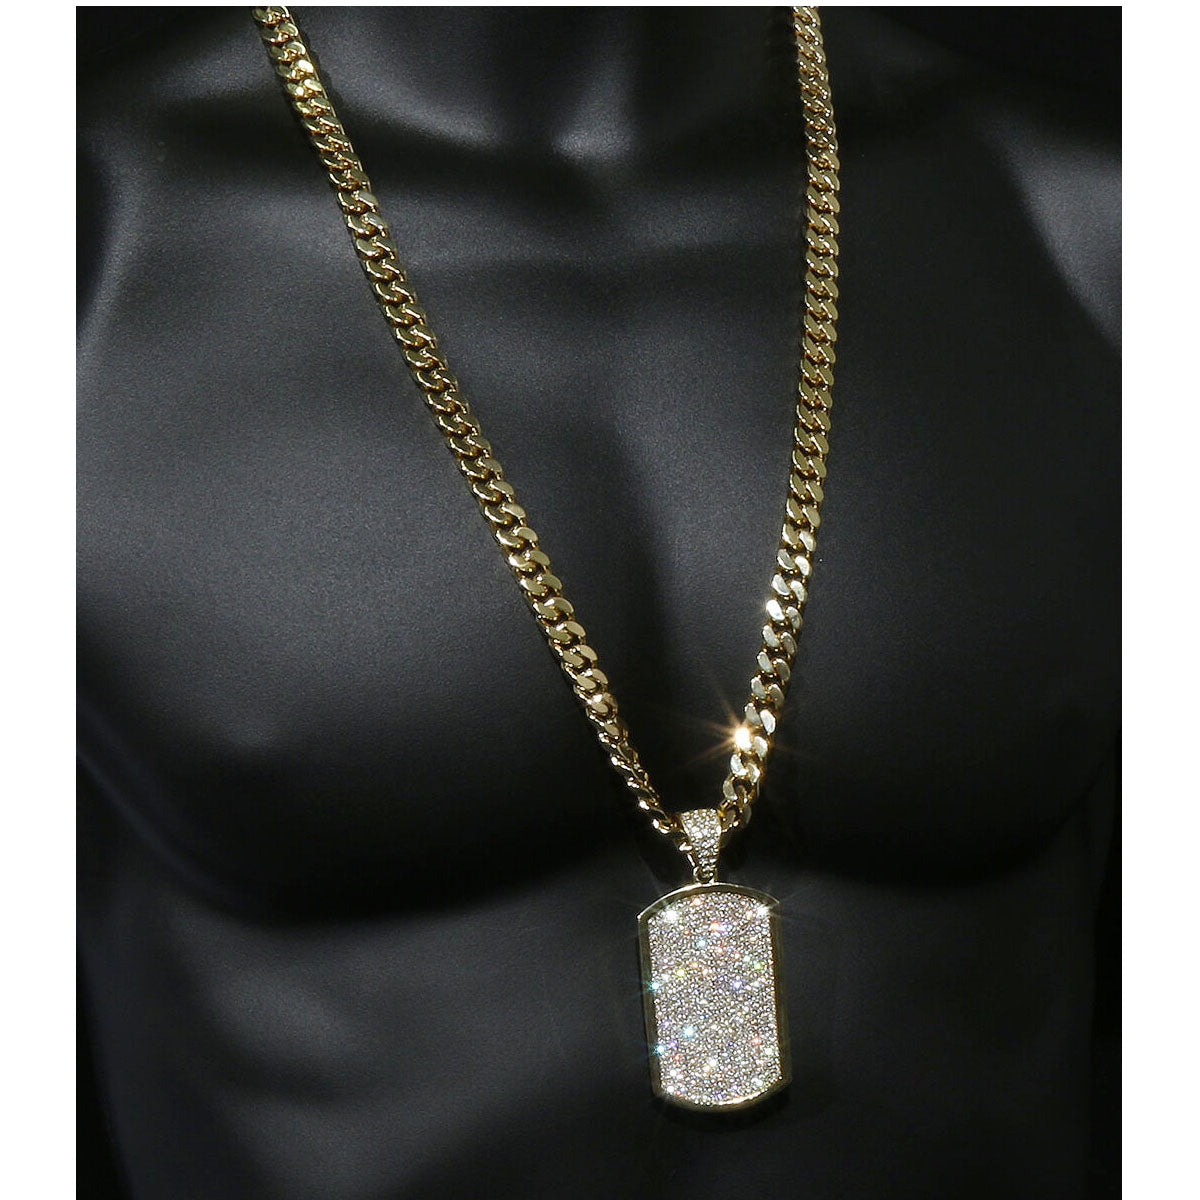 Gold Dog Tag Cz NECKLACE